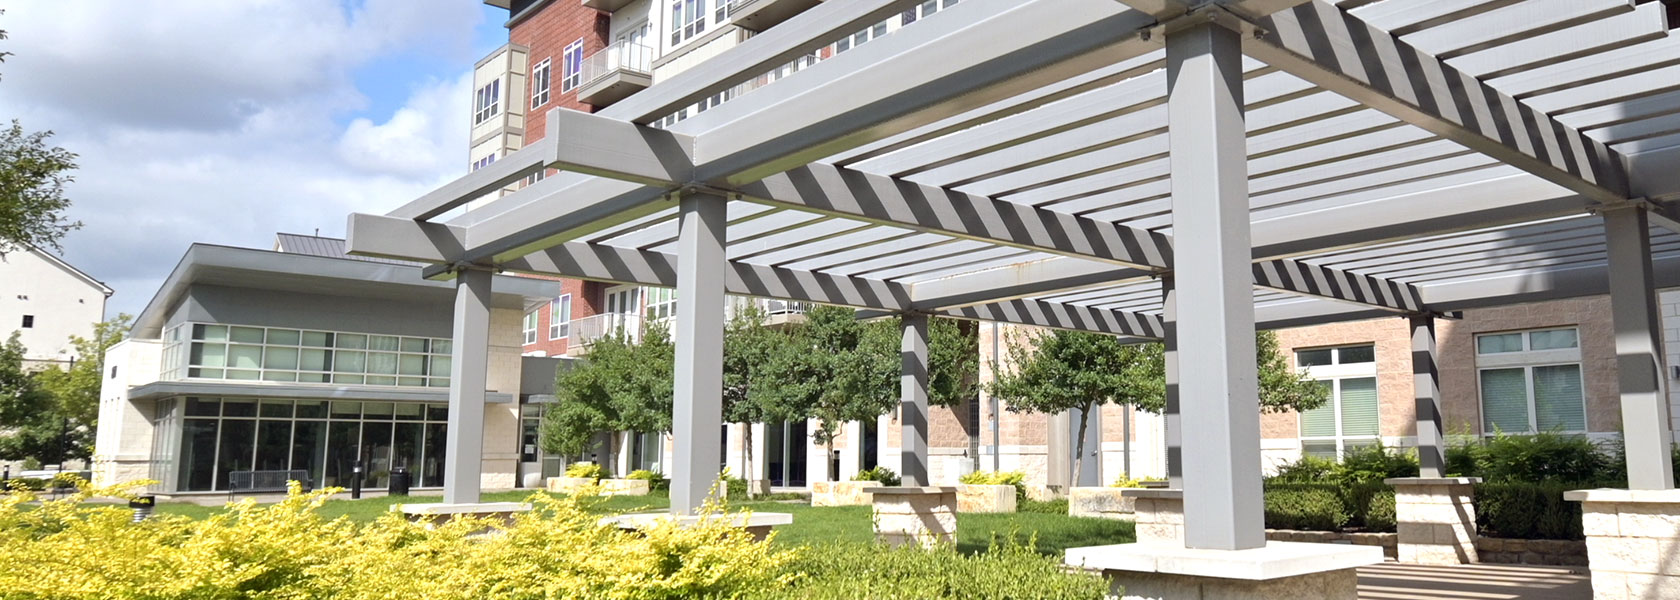 A large grey pergola with a patio beneath is before us. A grass field goes off to the left with the glass windows of the office building to Crest at Las Colinas Station at the end. The apartment building runs along the back.